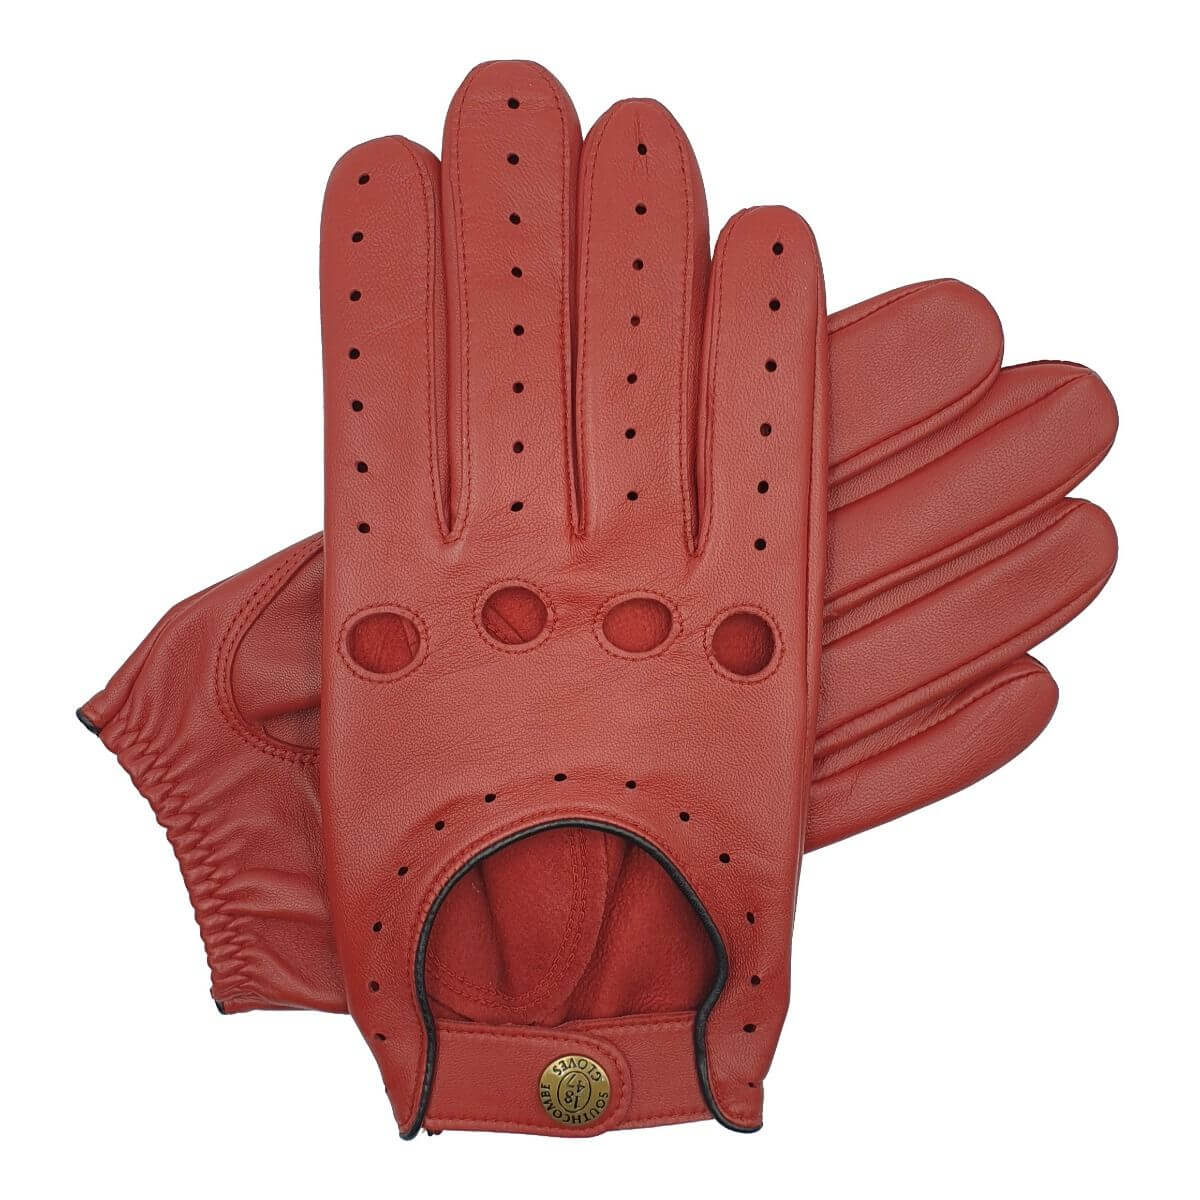 Southcombe Cooper - Men's Unlined Leather Driving Glove - Red